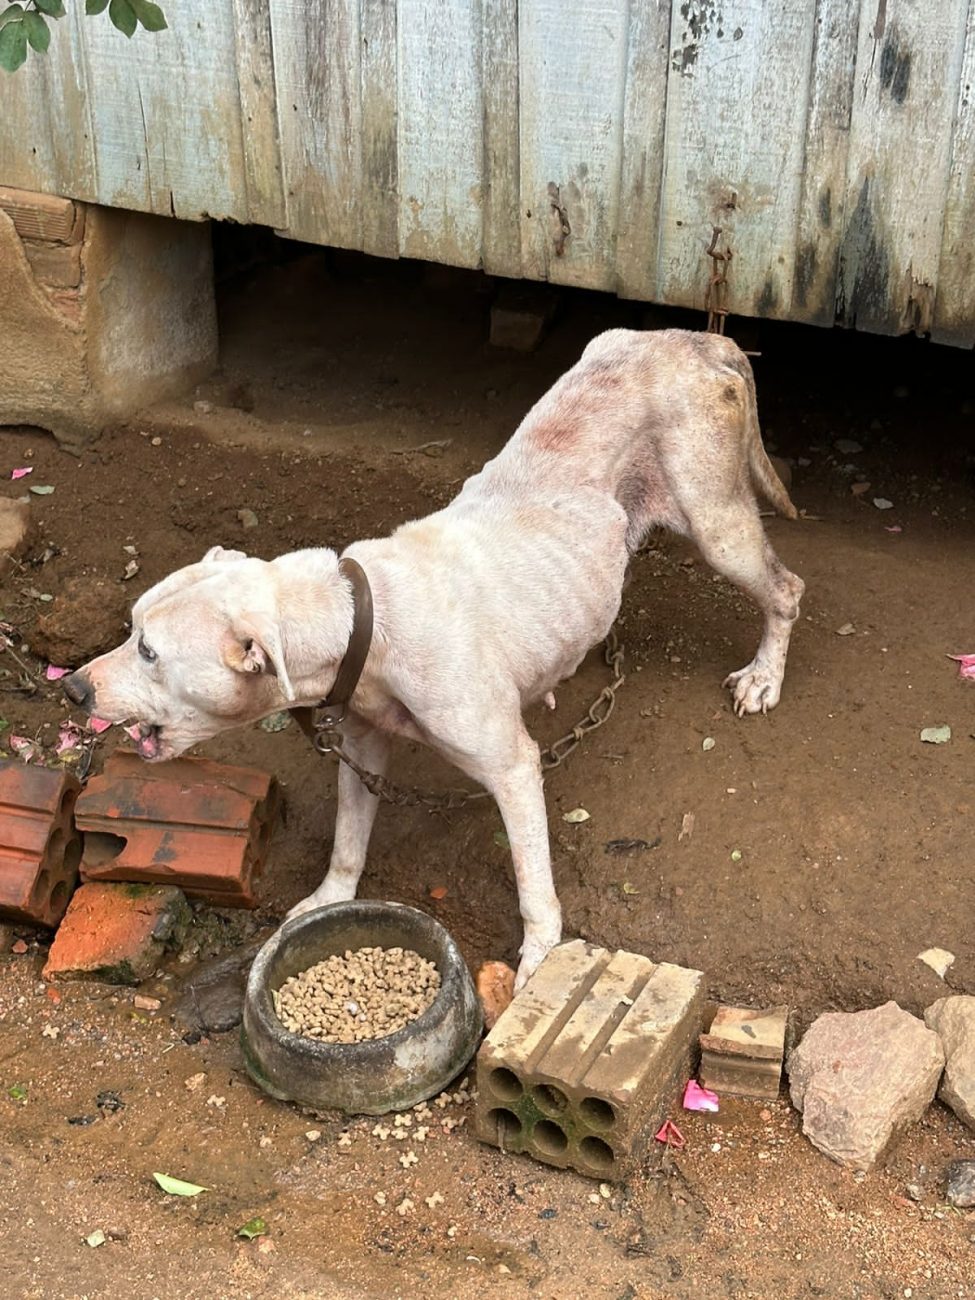 The dogs were found locked on short chains, without food or water - Civil Police/ND Reproduction